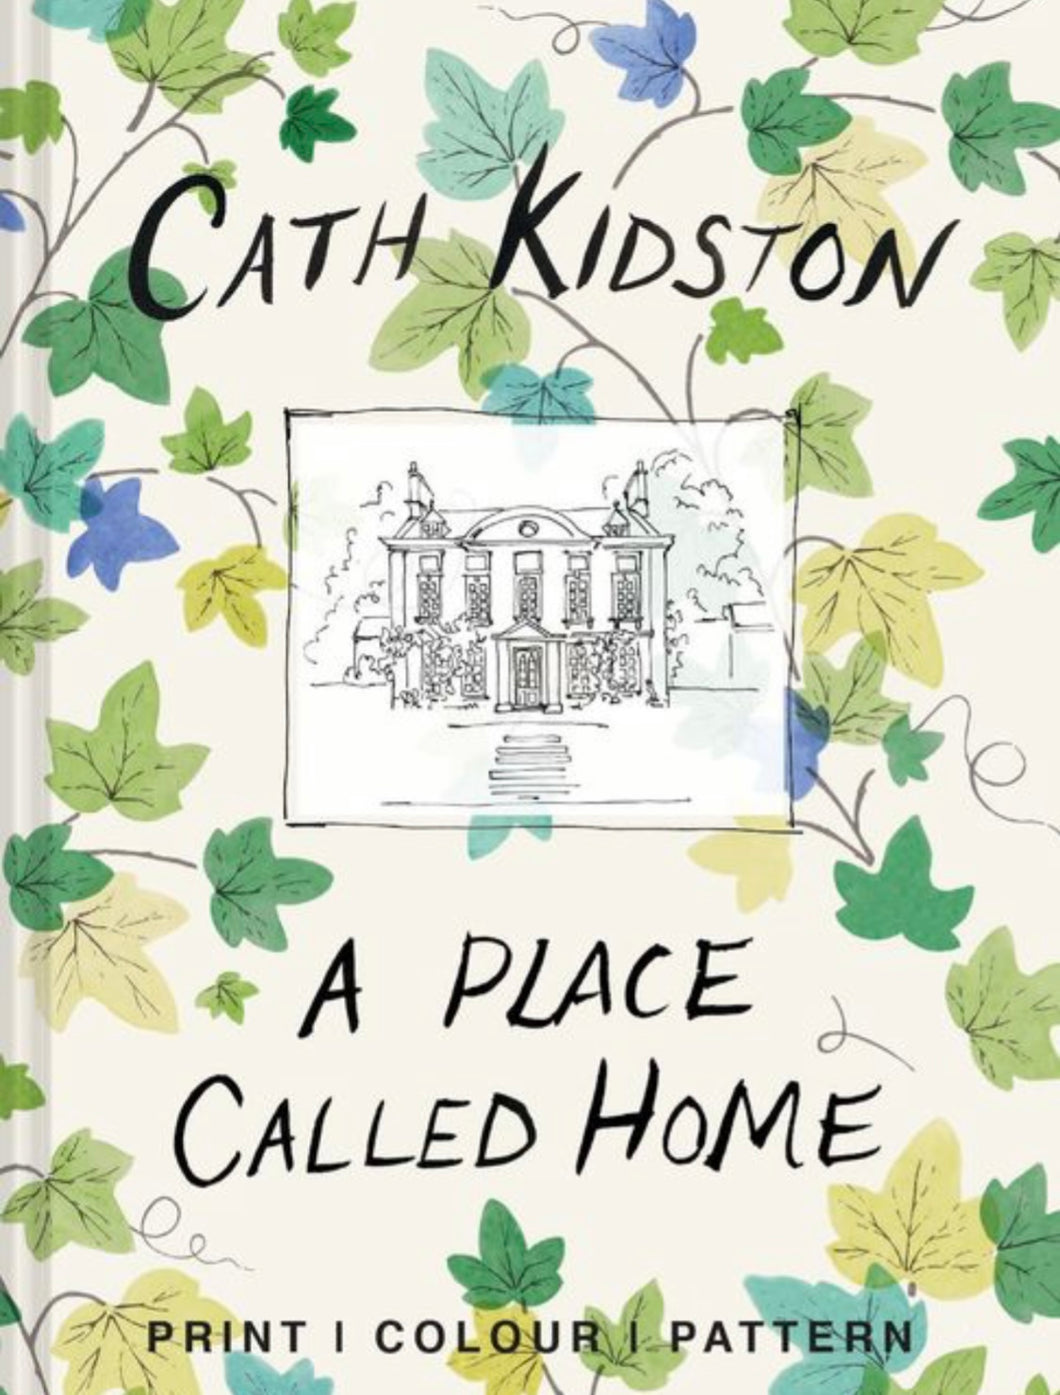 Cath Kidston “A Place Called Home”